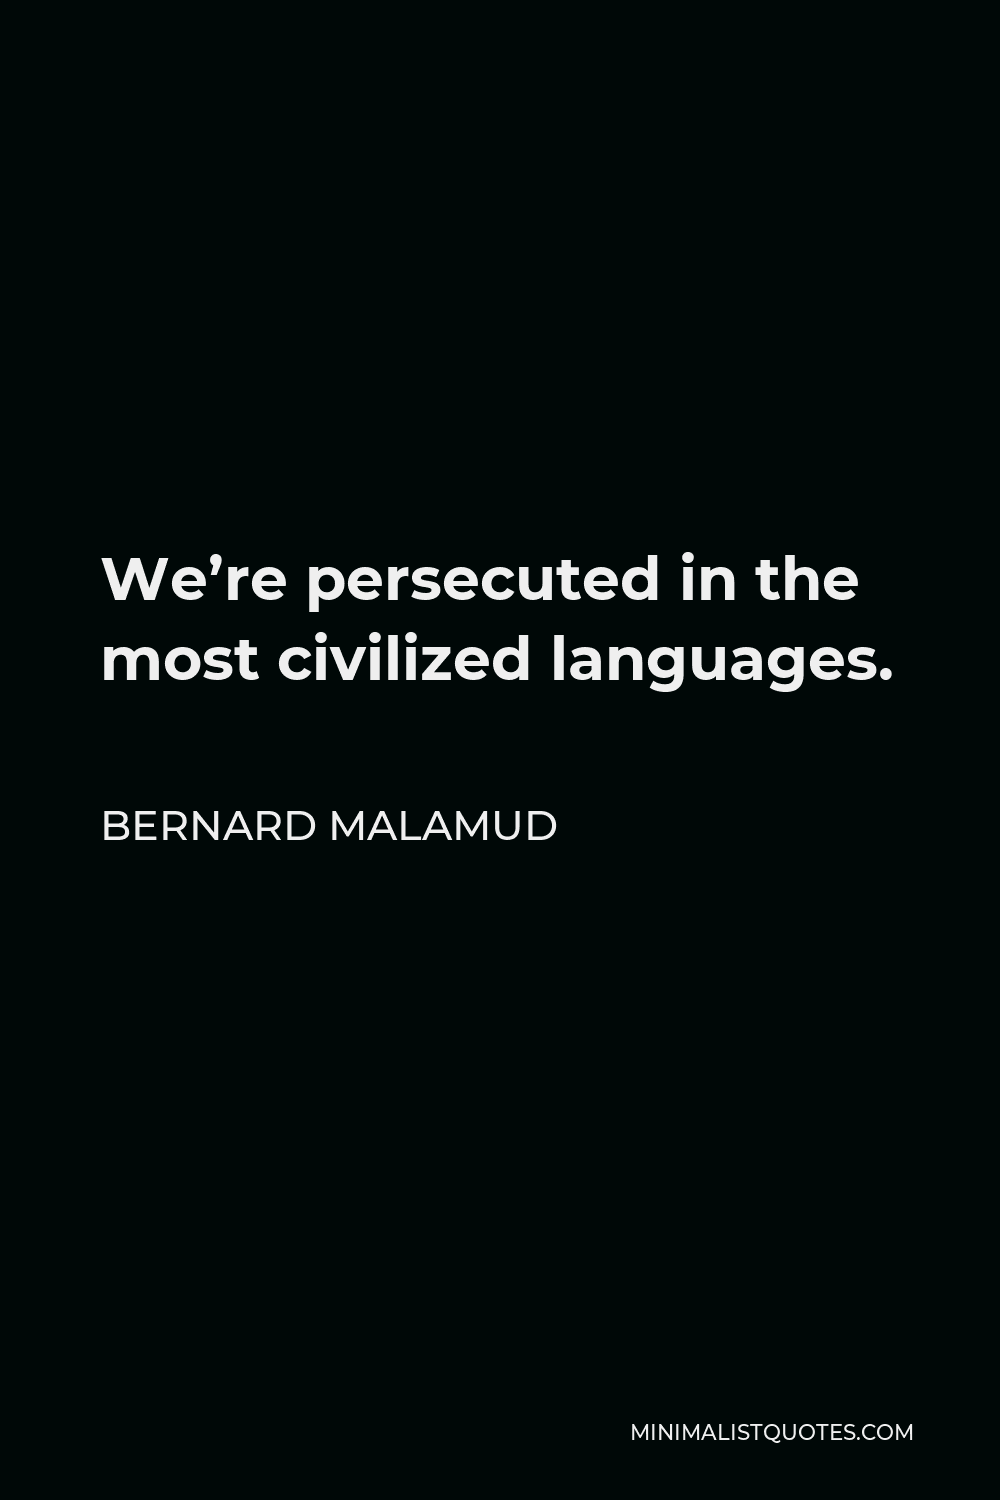 Bernard Malamud Quote - We’re persecuted in the most civilized languages.